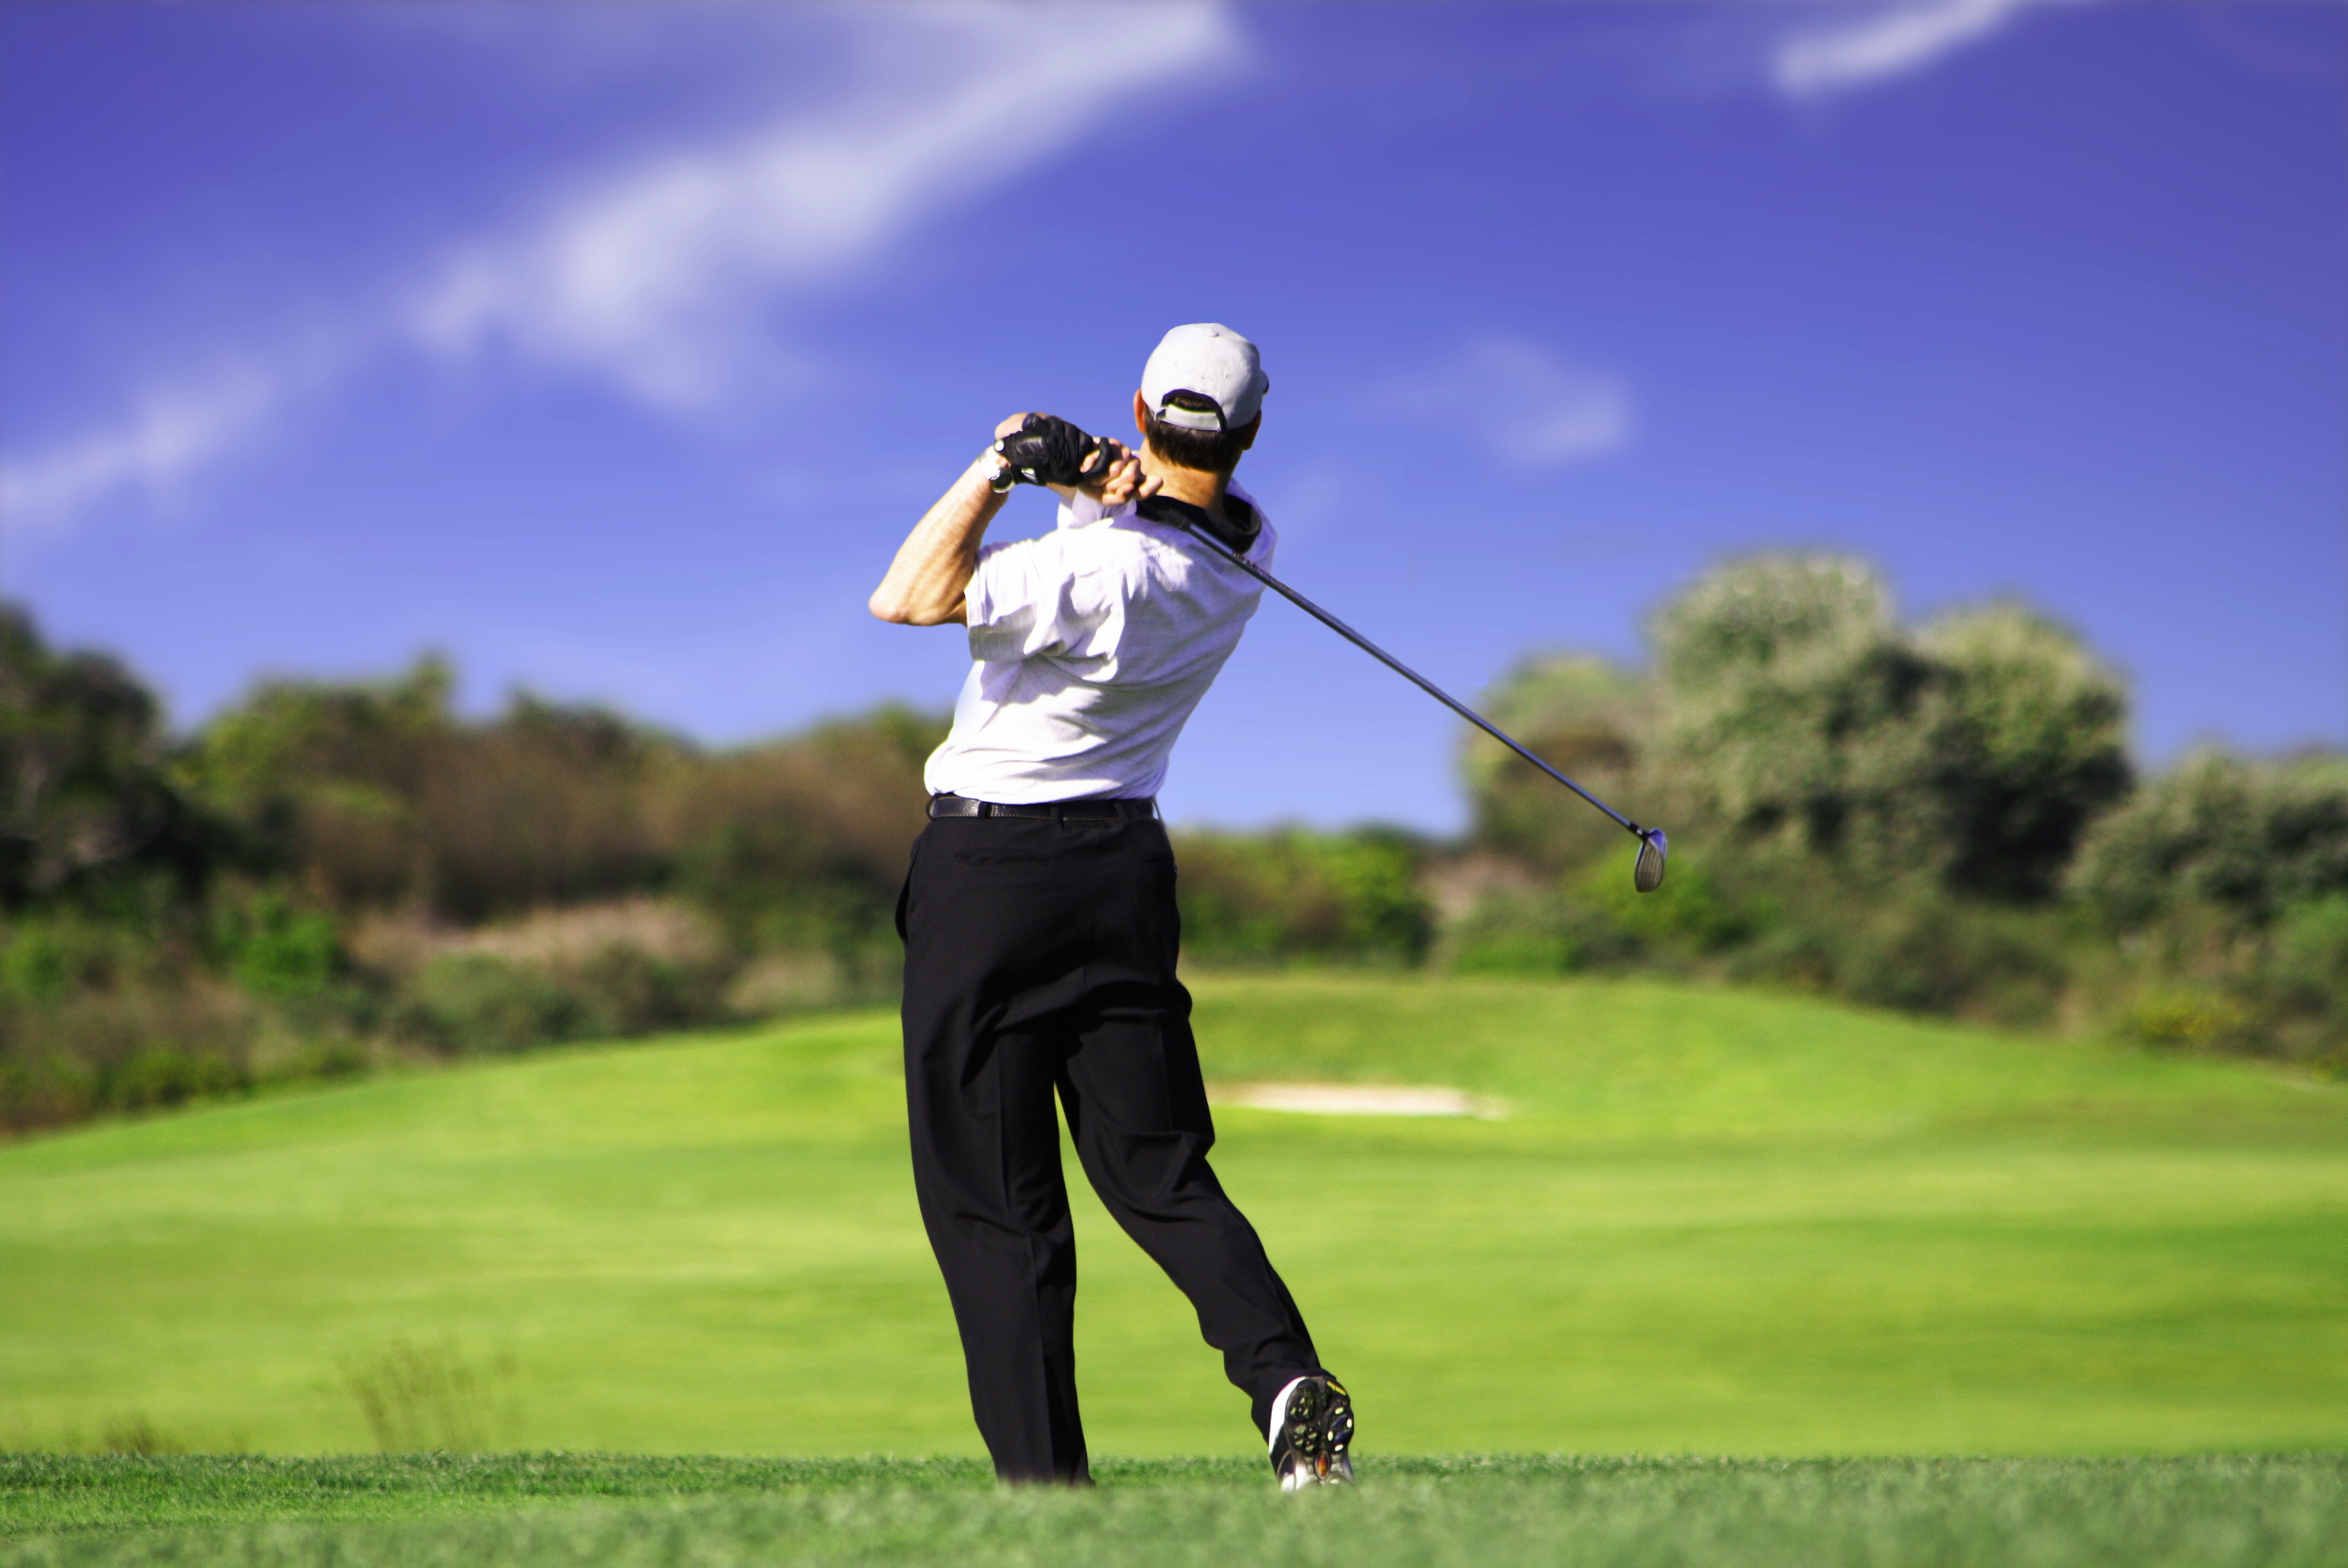 What Do Golf and Skin Cancer Have In Common?